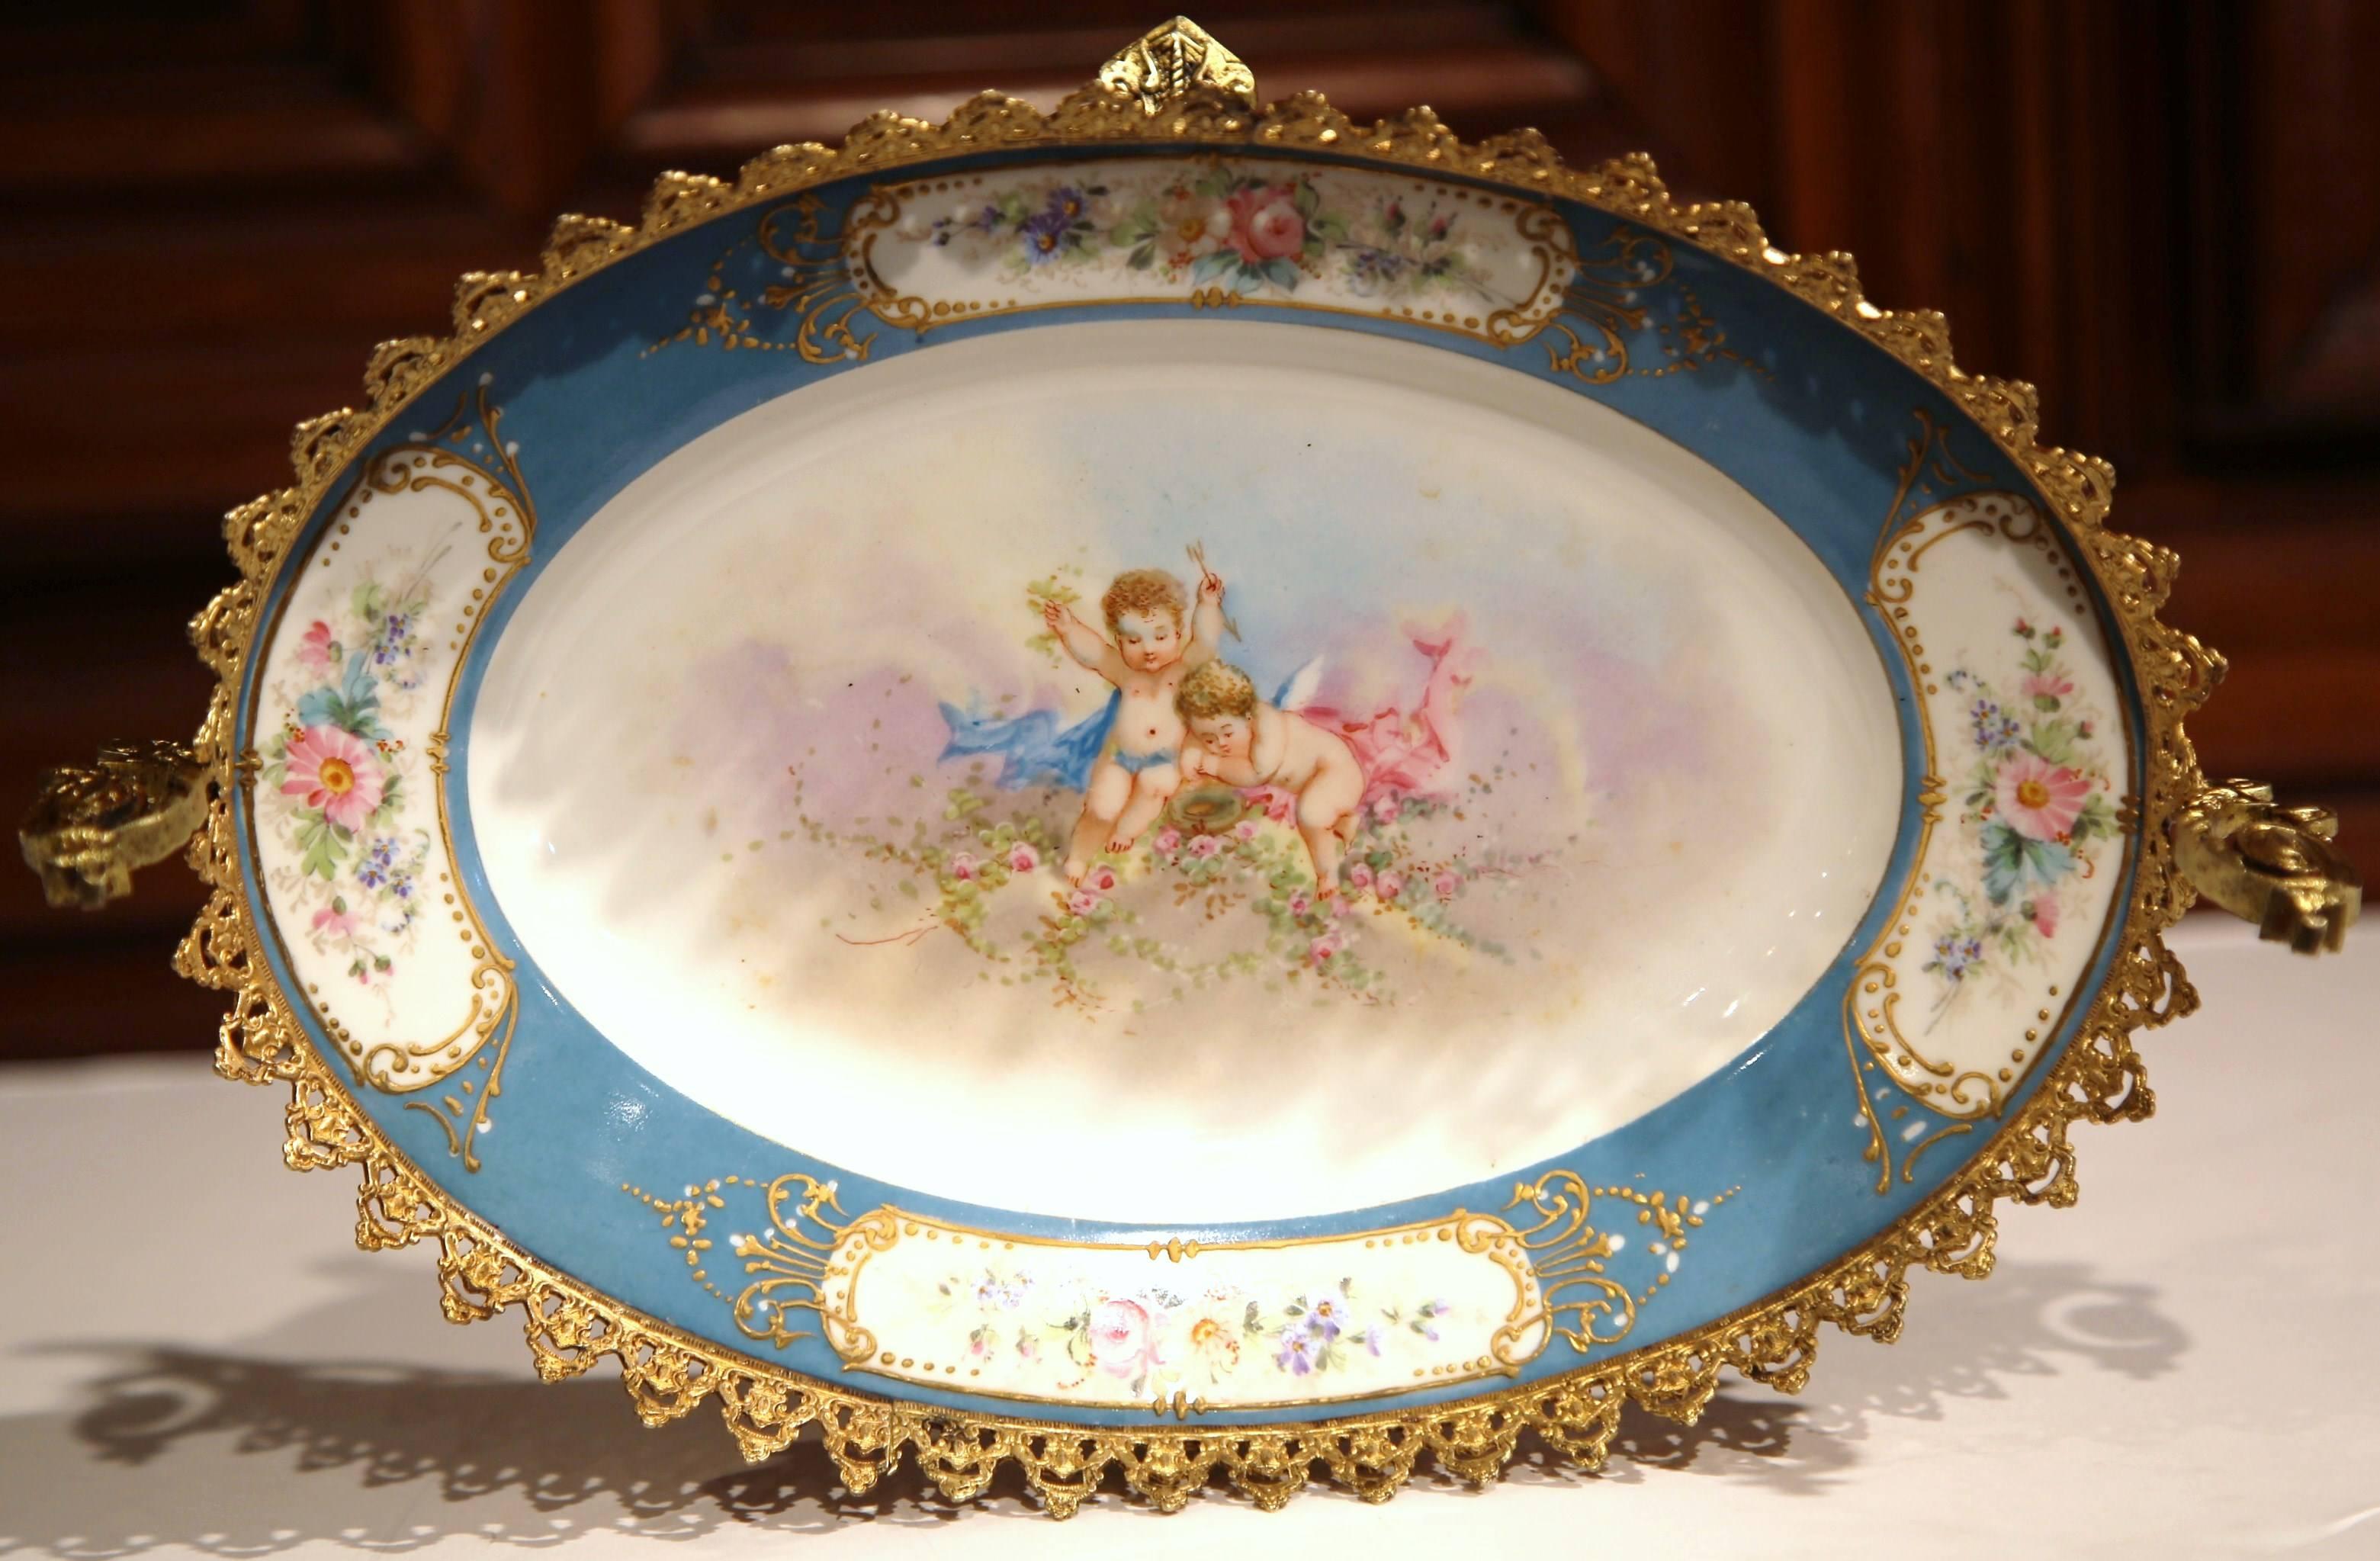 This elegant, antique blue and white vide poche was crafted in Sèvres, France circa 1870. The ornate decorative tray is embellished with hand-painted cherubs and flower medallions, as well as ornamental brass mounts, handles and scrolled feet.